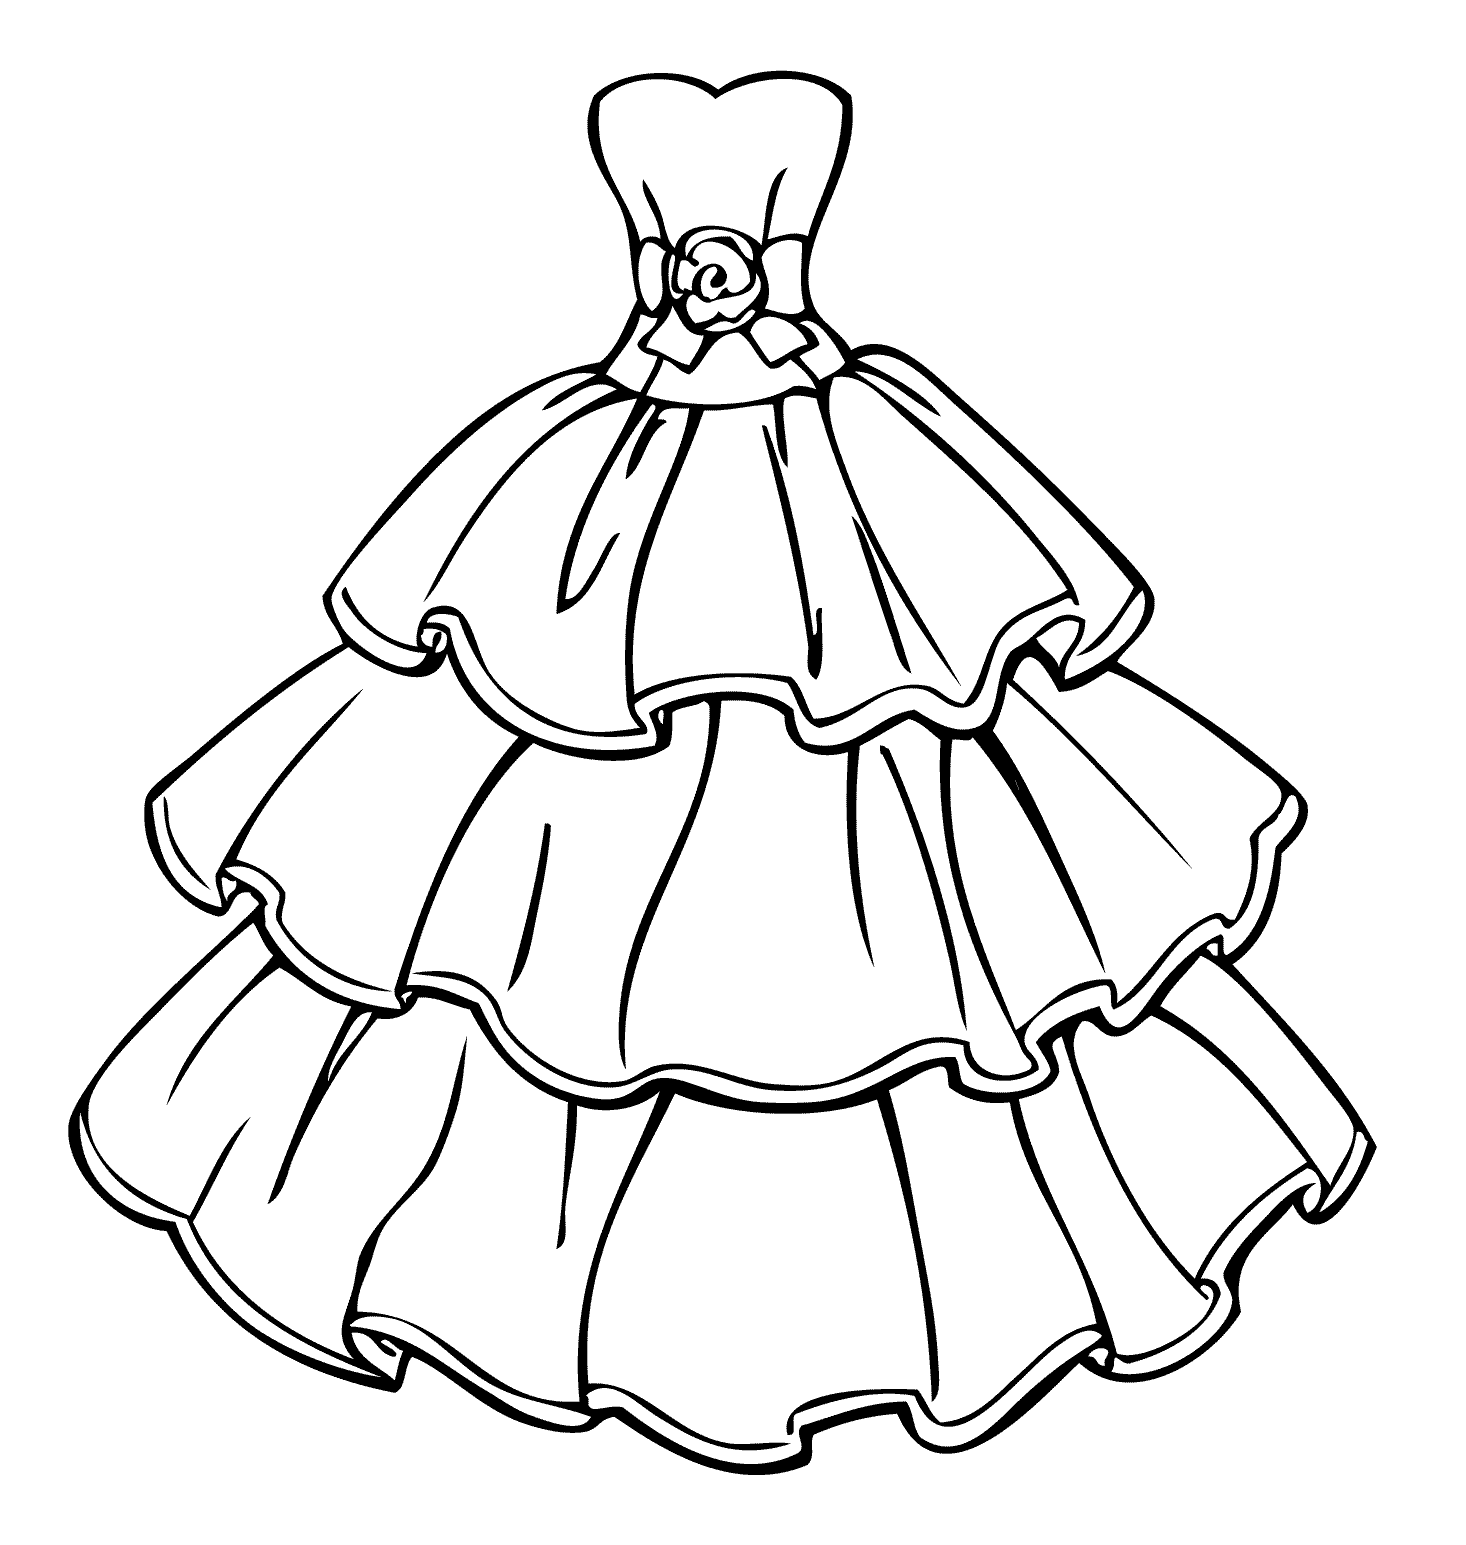 Girls Wedding Dress Coloring Pages   Dress Coloring Pages ...